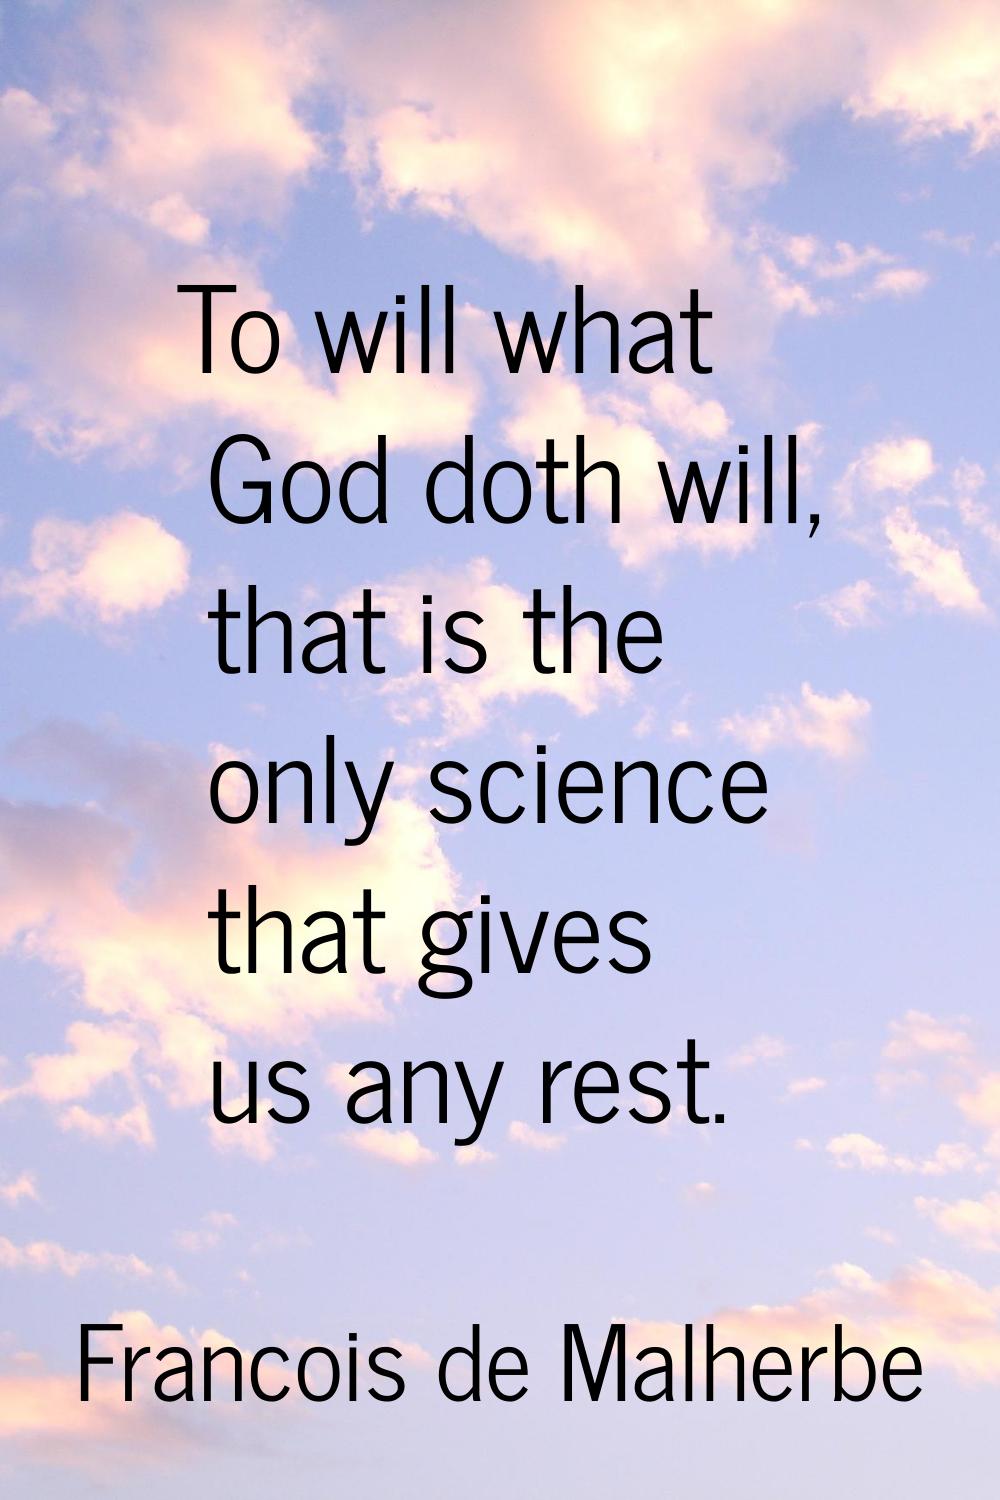 To will what God doth will, that is the only science that gives us any rest.